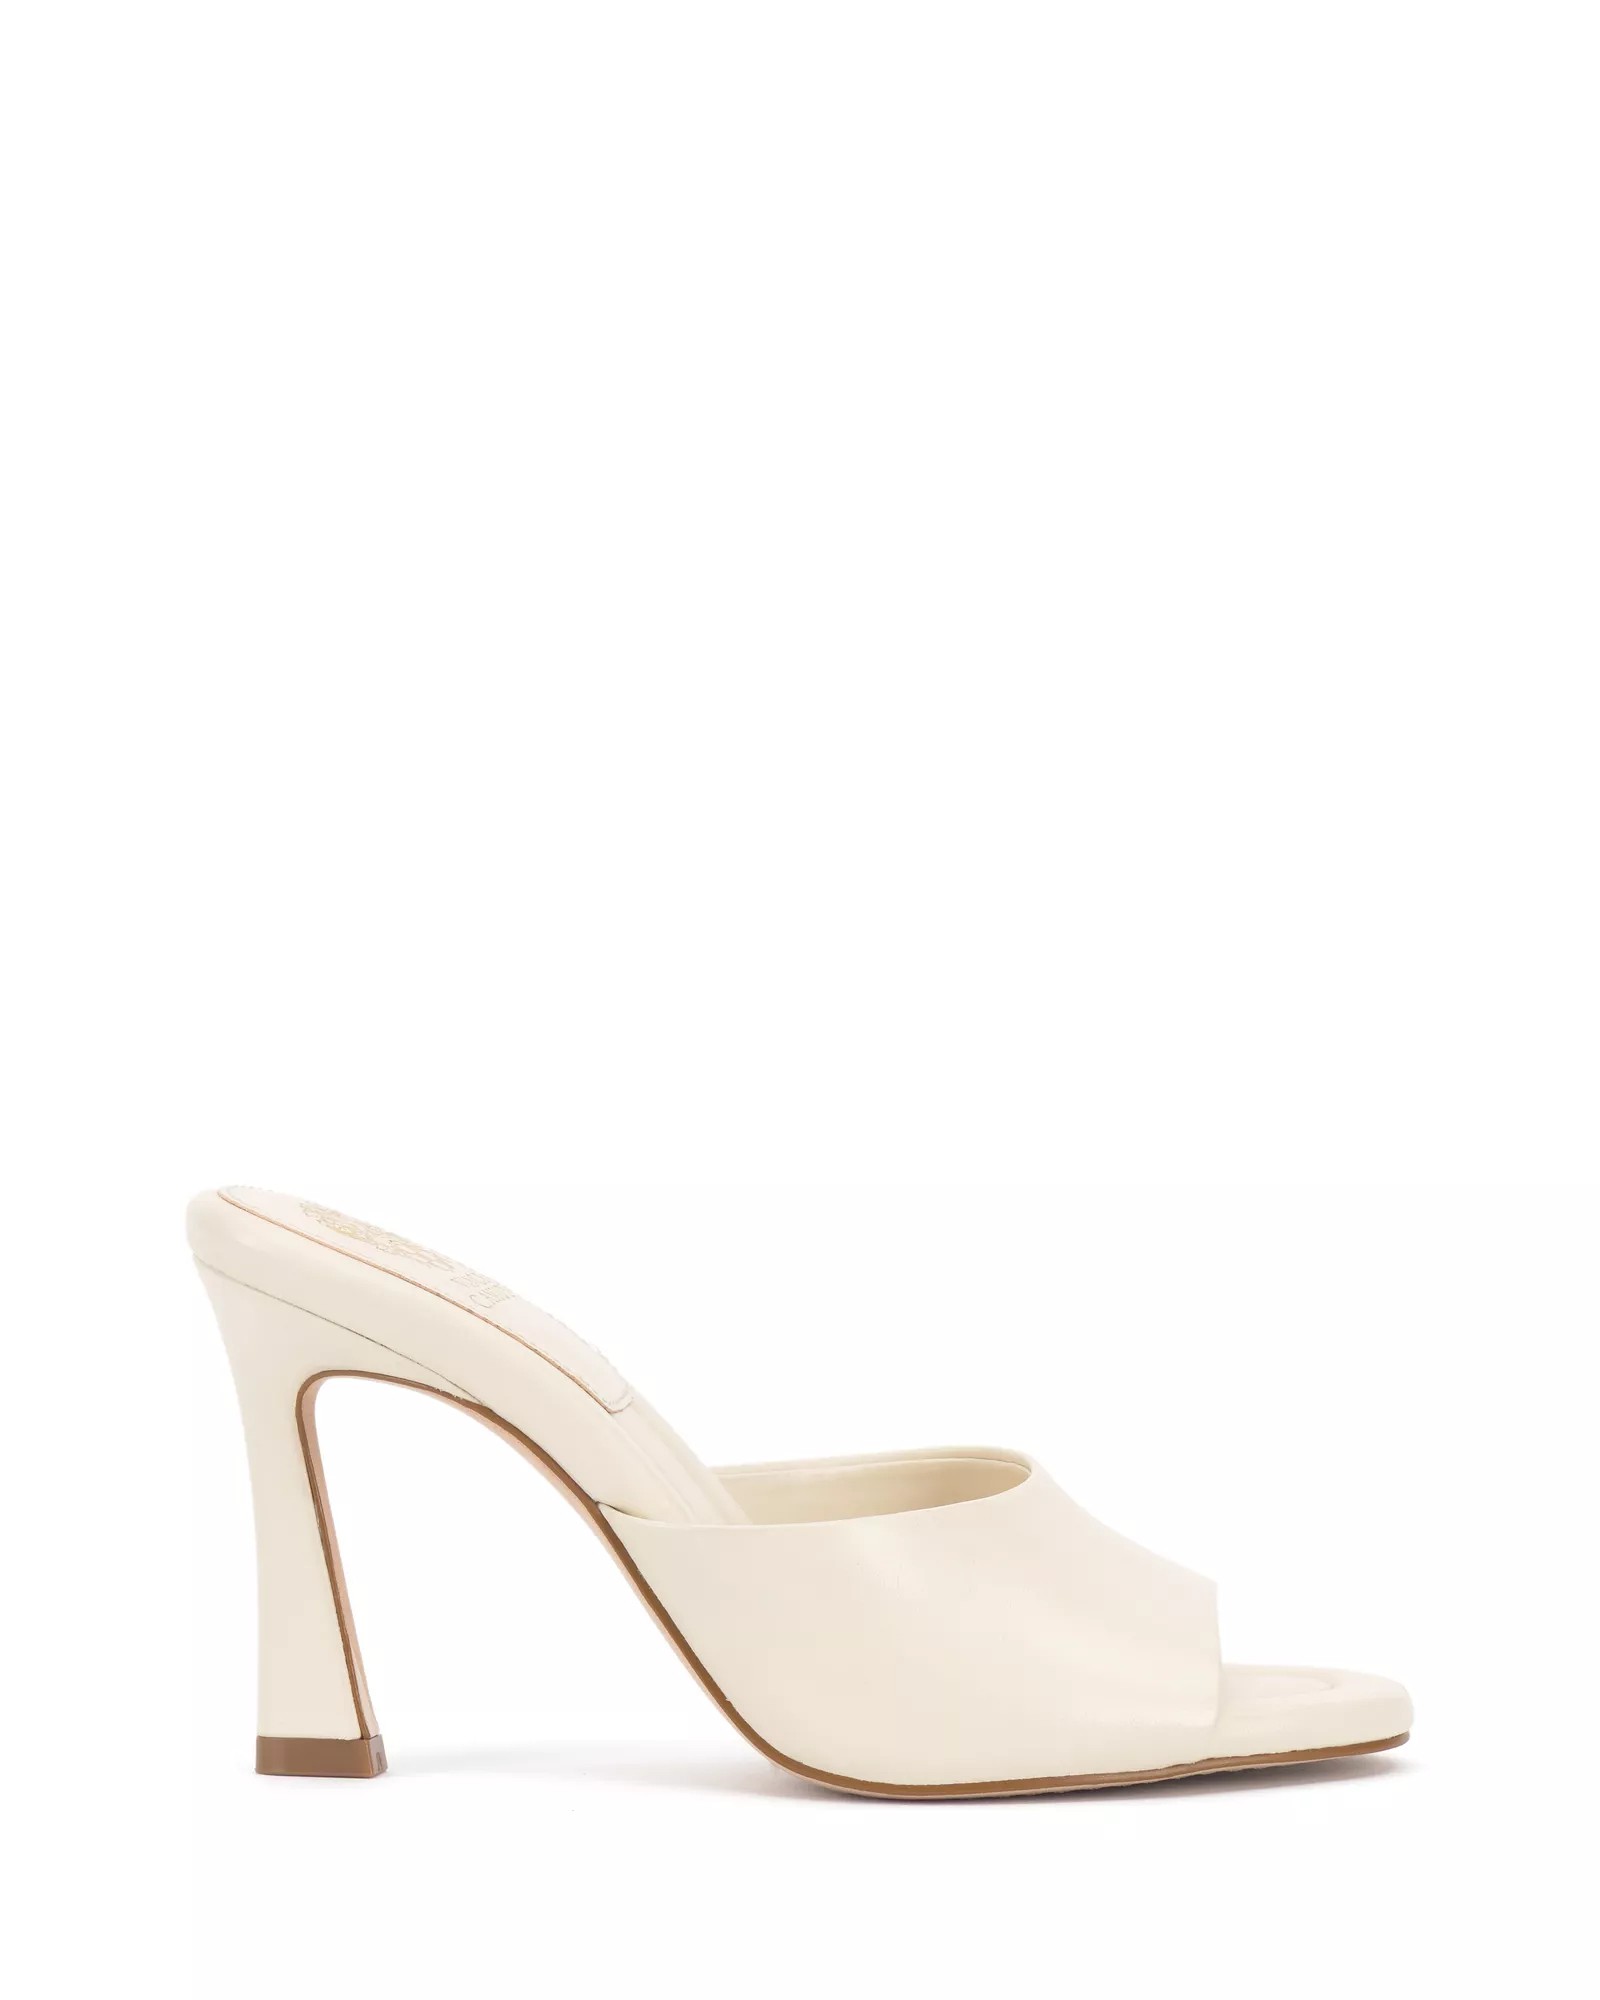 Vince Camuto Paigely Mule